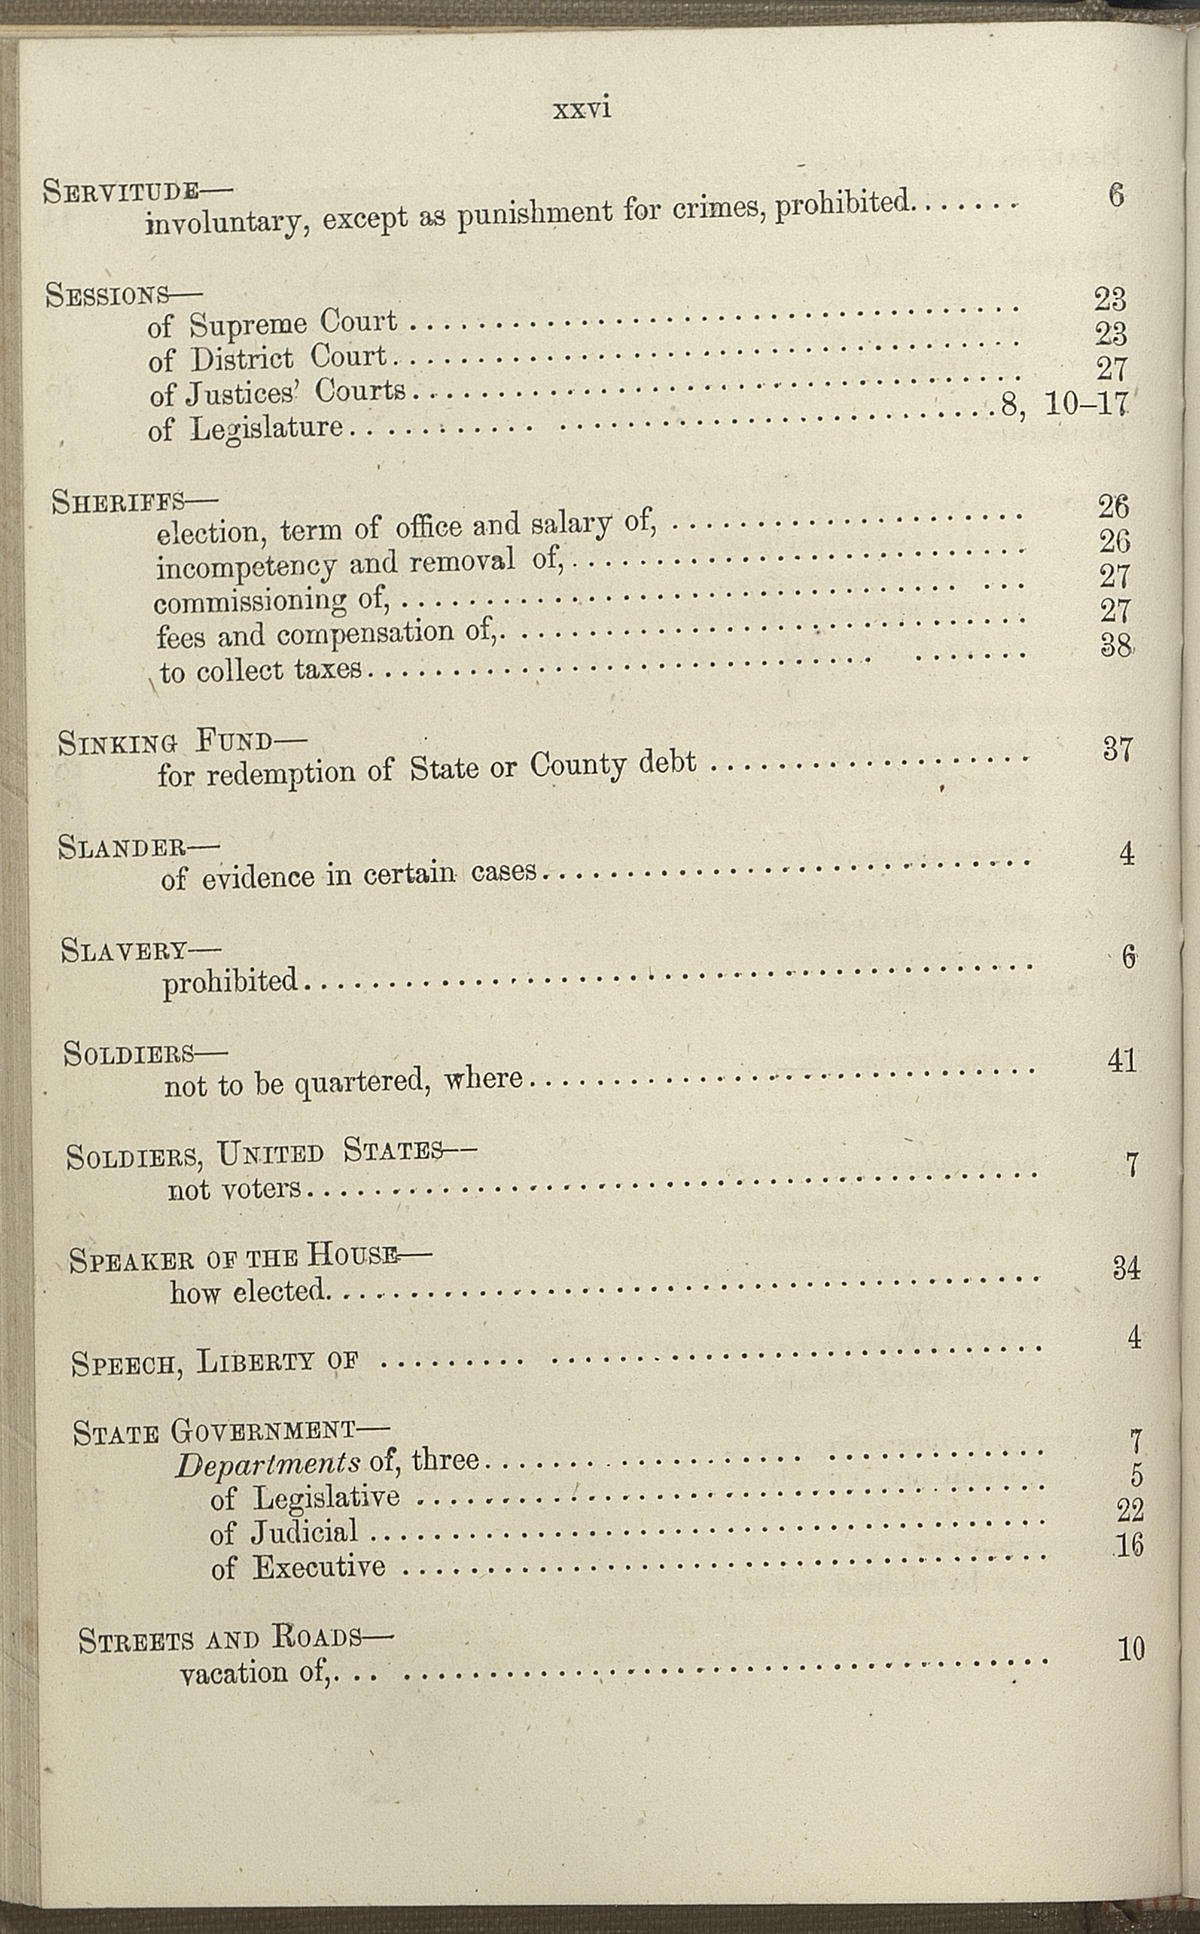 page 26 - 1869 index